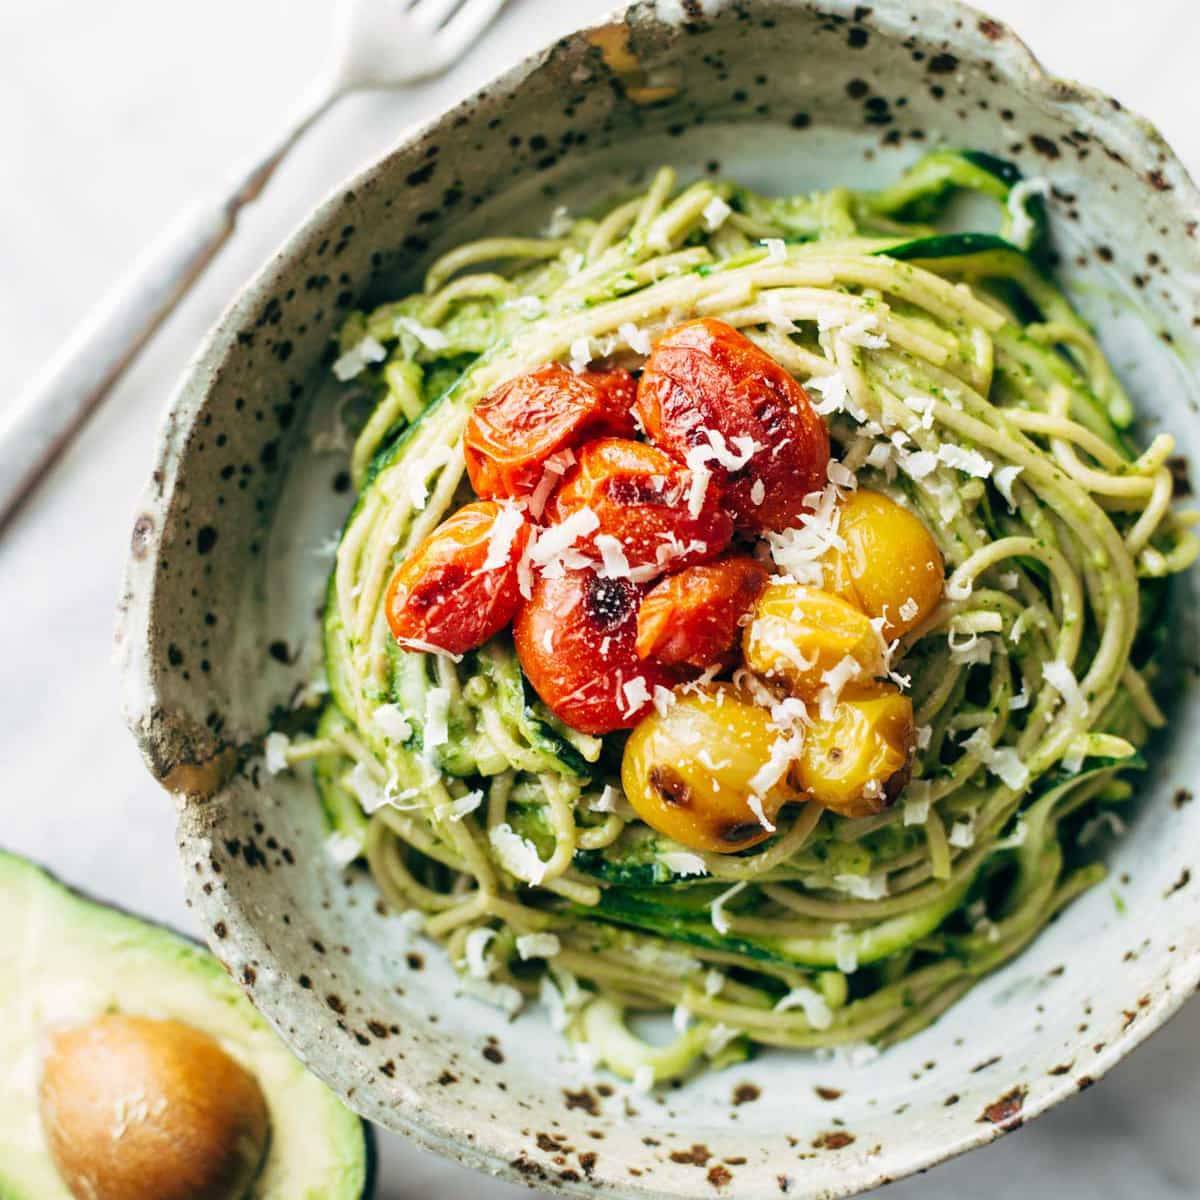 Zucchini Spaghetti with Avocado Sauce in a bowl with tomatoes.